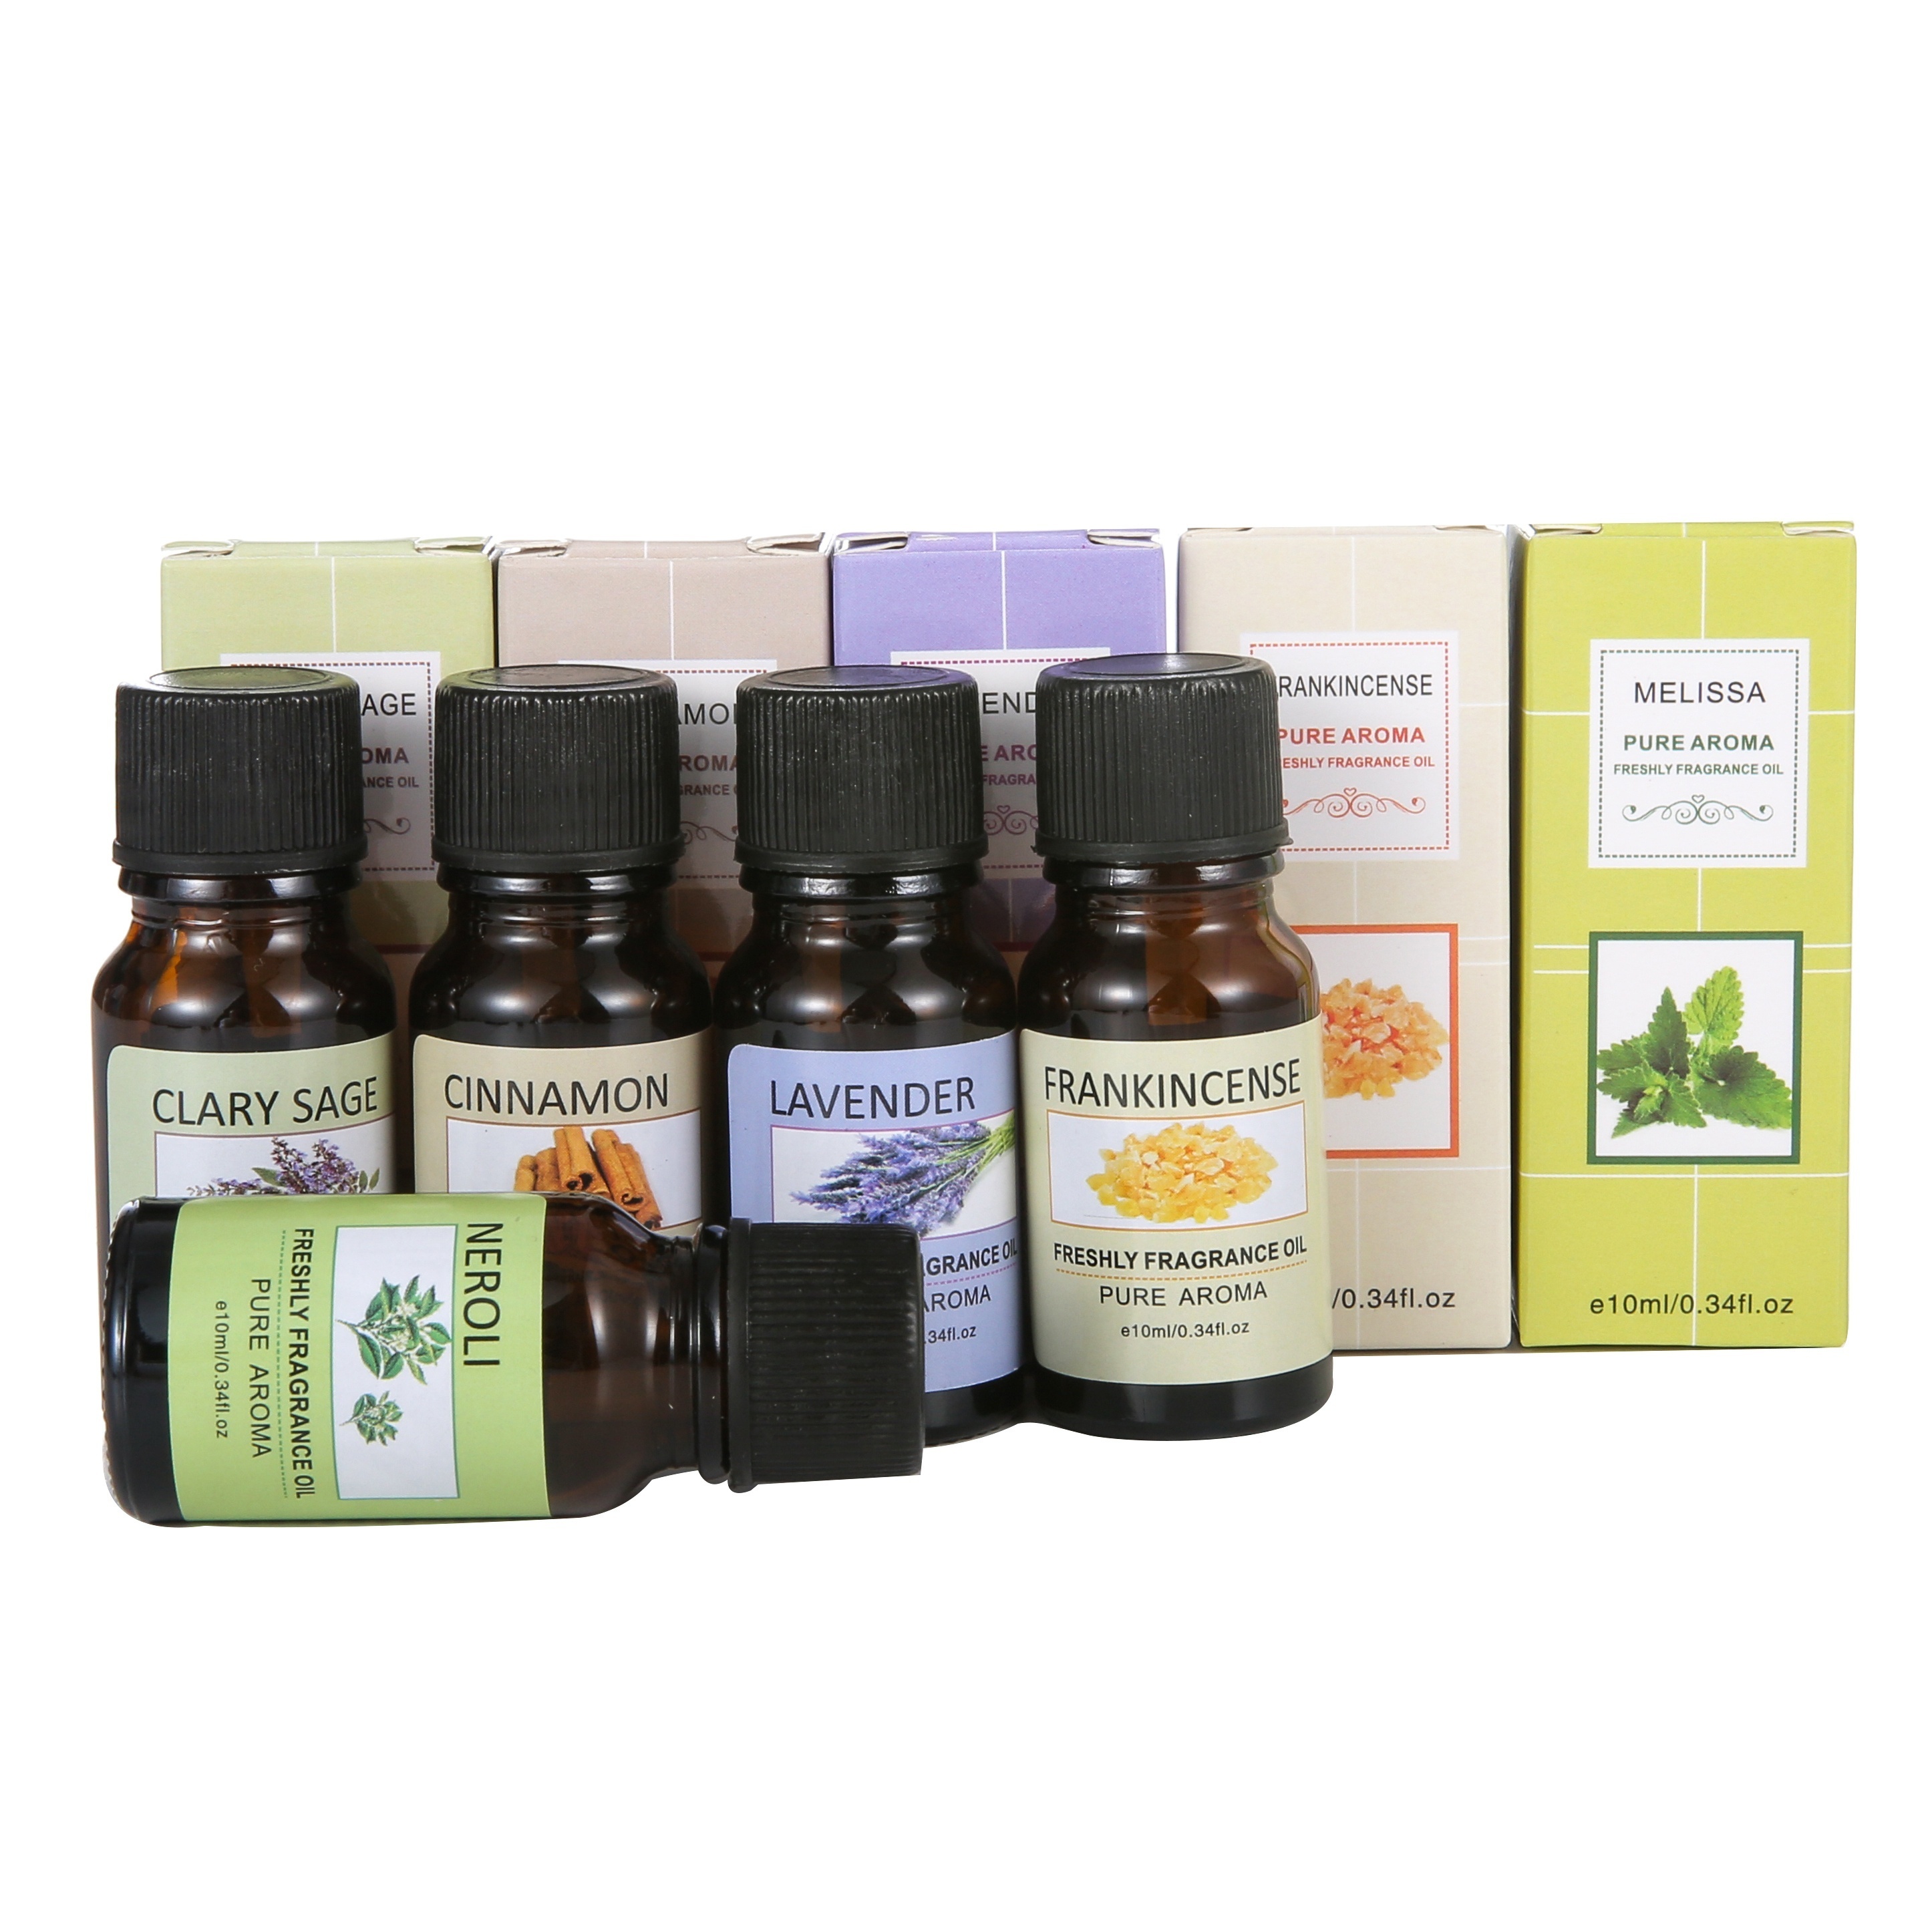 Fruity Essential Oils Set - Top 14 Fragrance Oil for Diffusers, Candle Making Includes Strawberry, Apple, Pineapple, Cucumber Melon, Cherry, Mango, Le